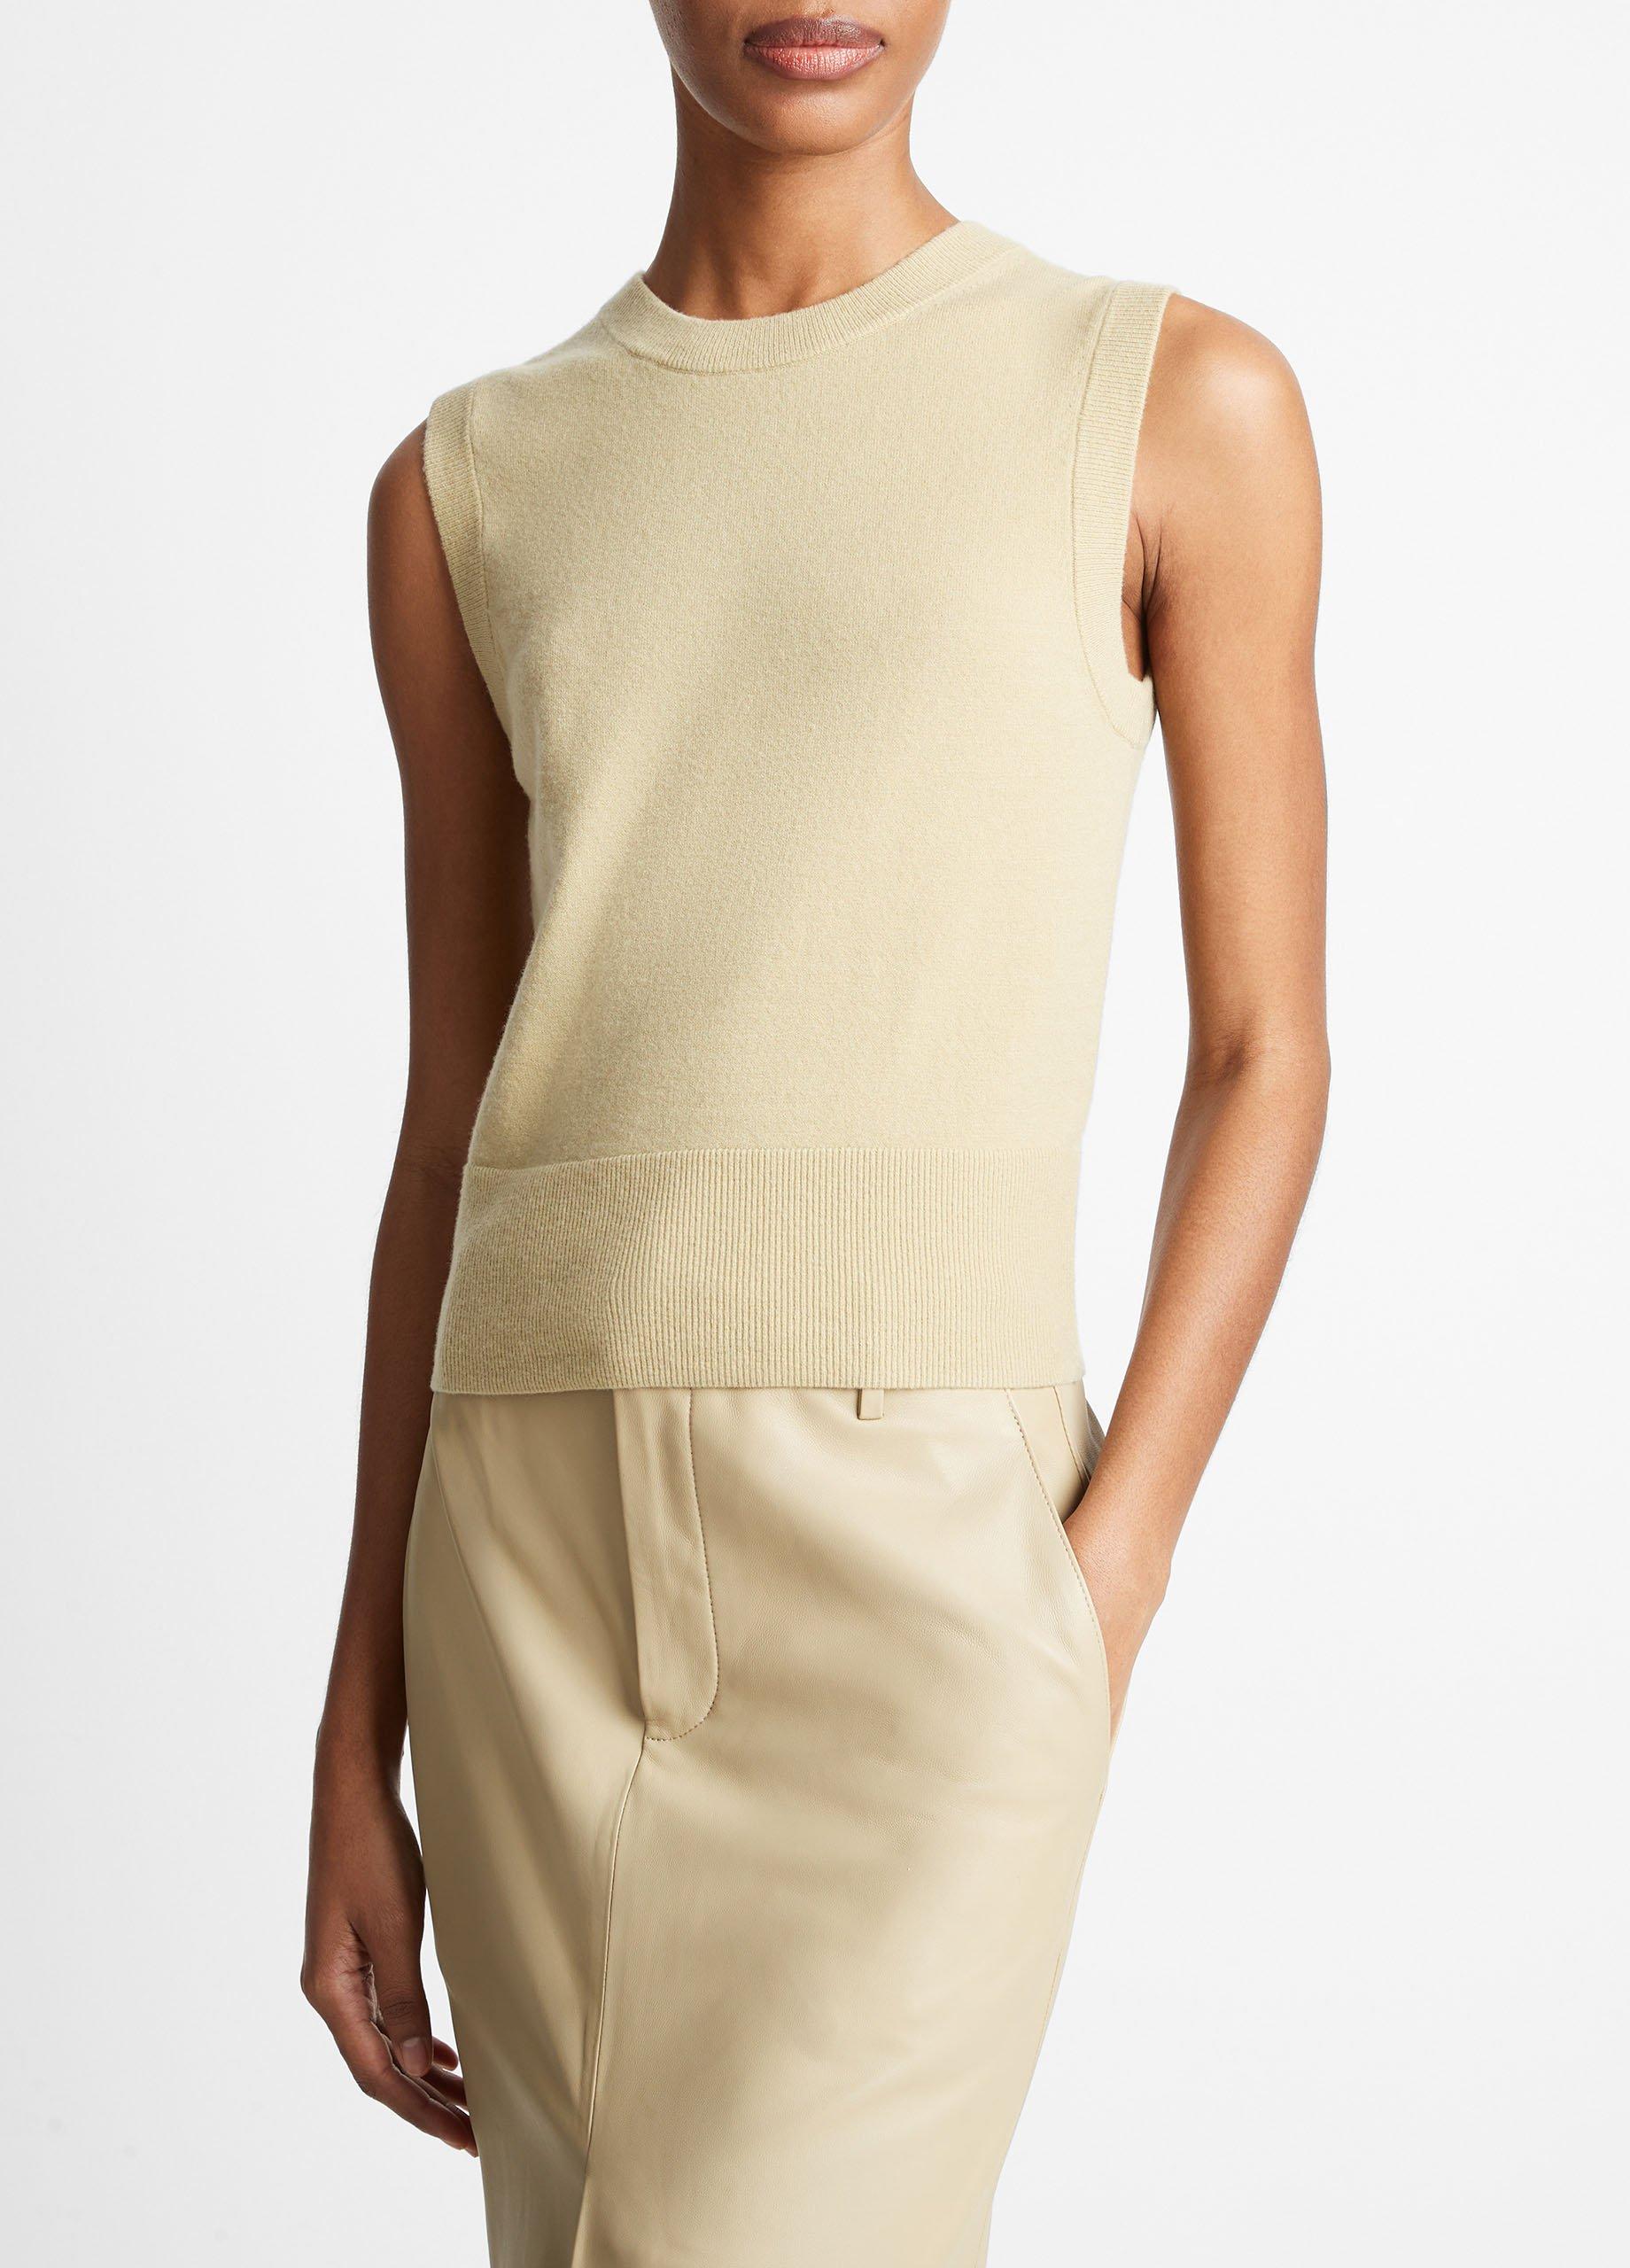 Wool-Blend Crew Neck Shell in Crew Neck | Vince